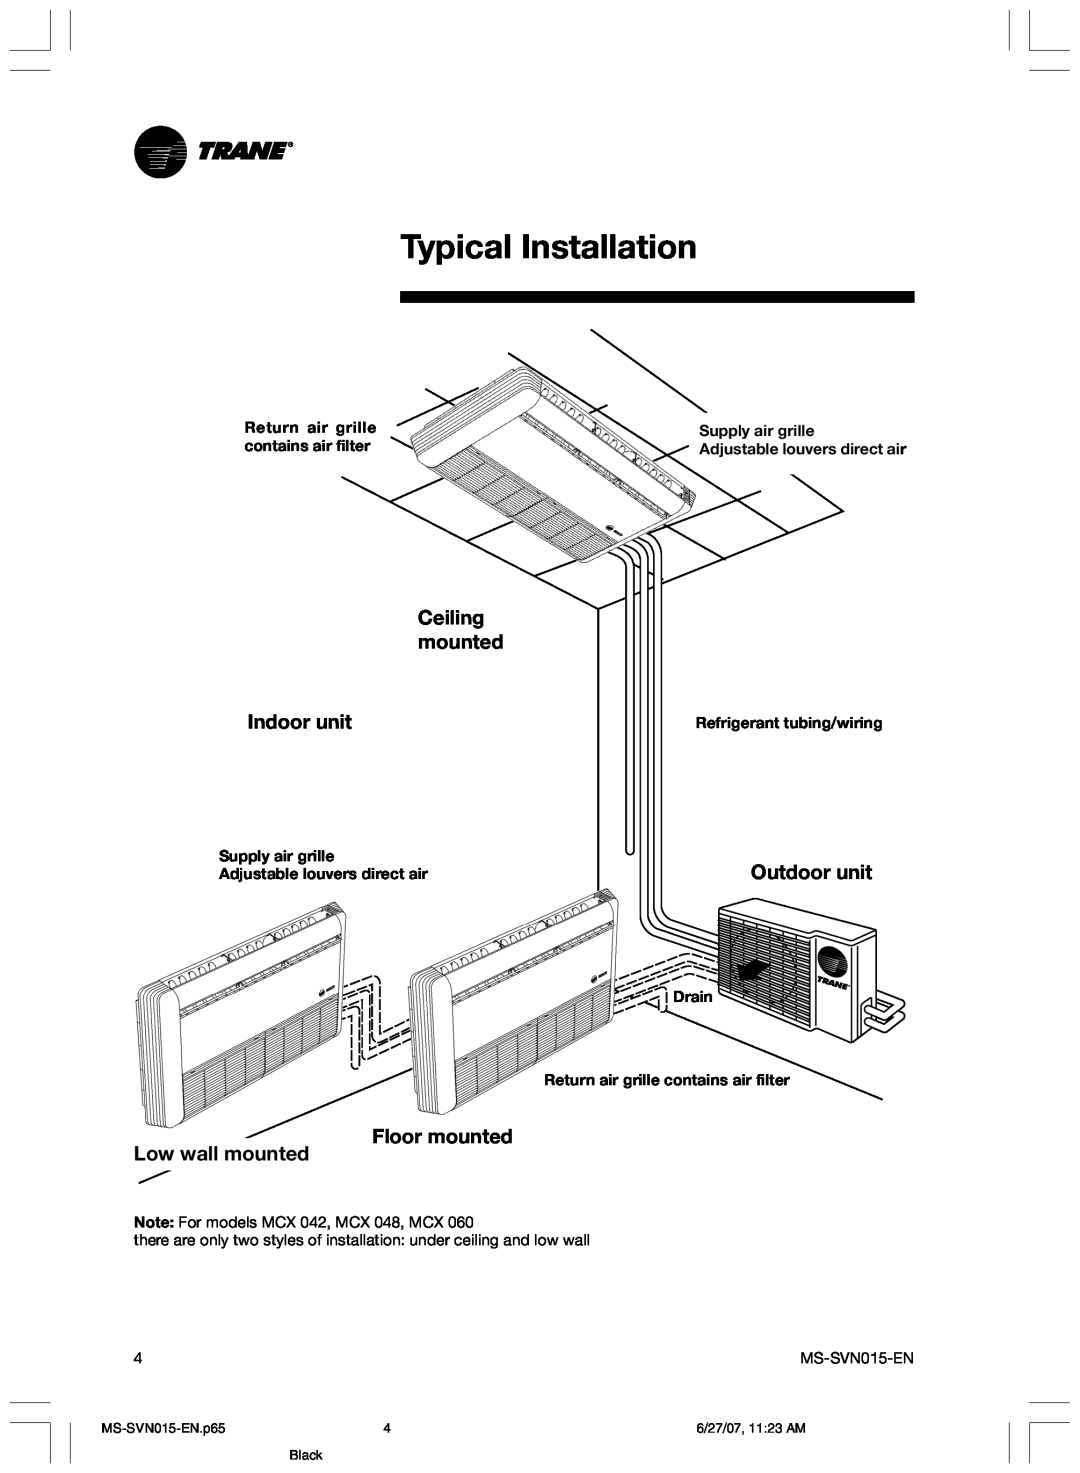 Trane MS-SVN015-EN Typical Installation, Ceiling mounted Indoor unit, Outdoor unit, Floor mounted Low wall mounted, Drain 